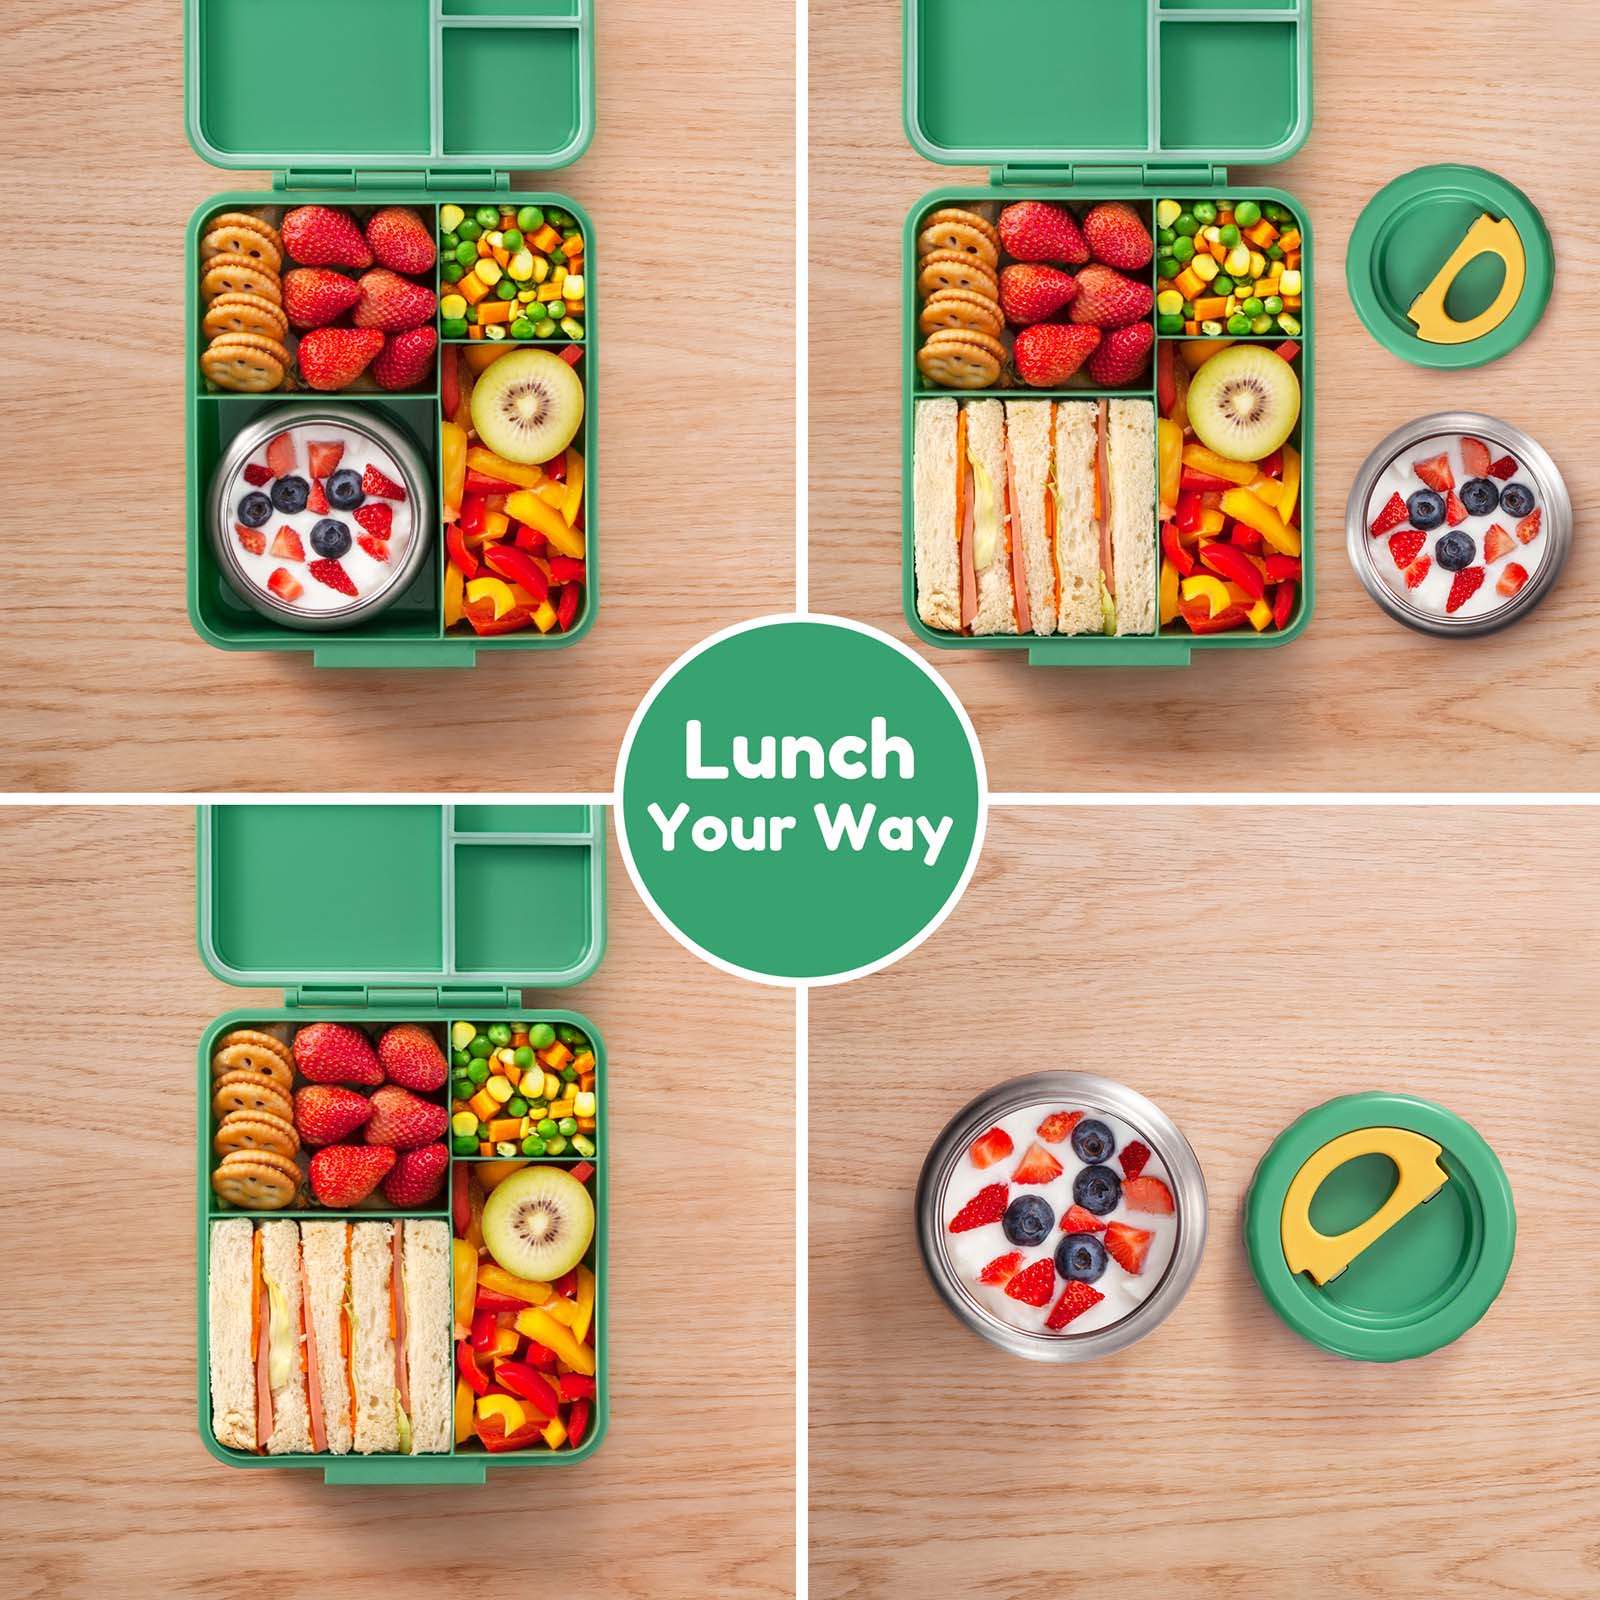 Caperci Insulated Kids Bento Lunch Box with Thermos Jar